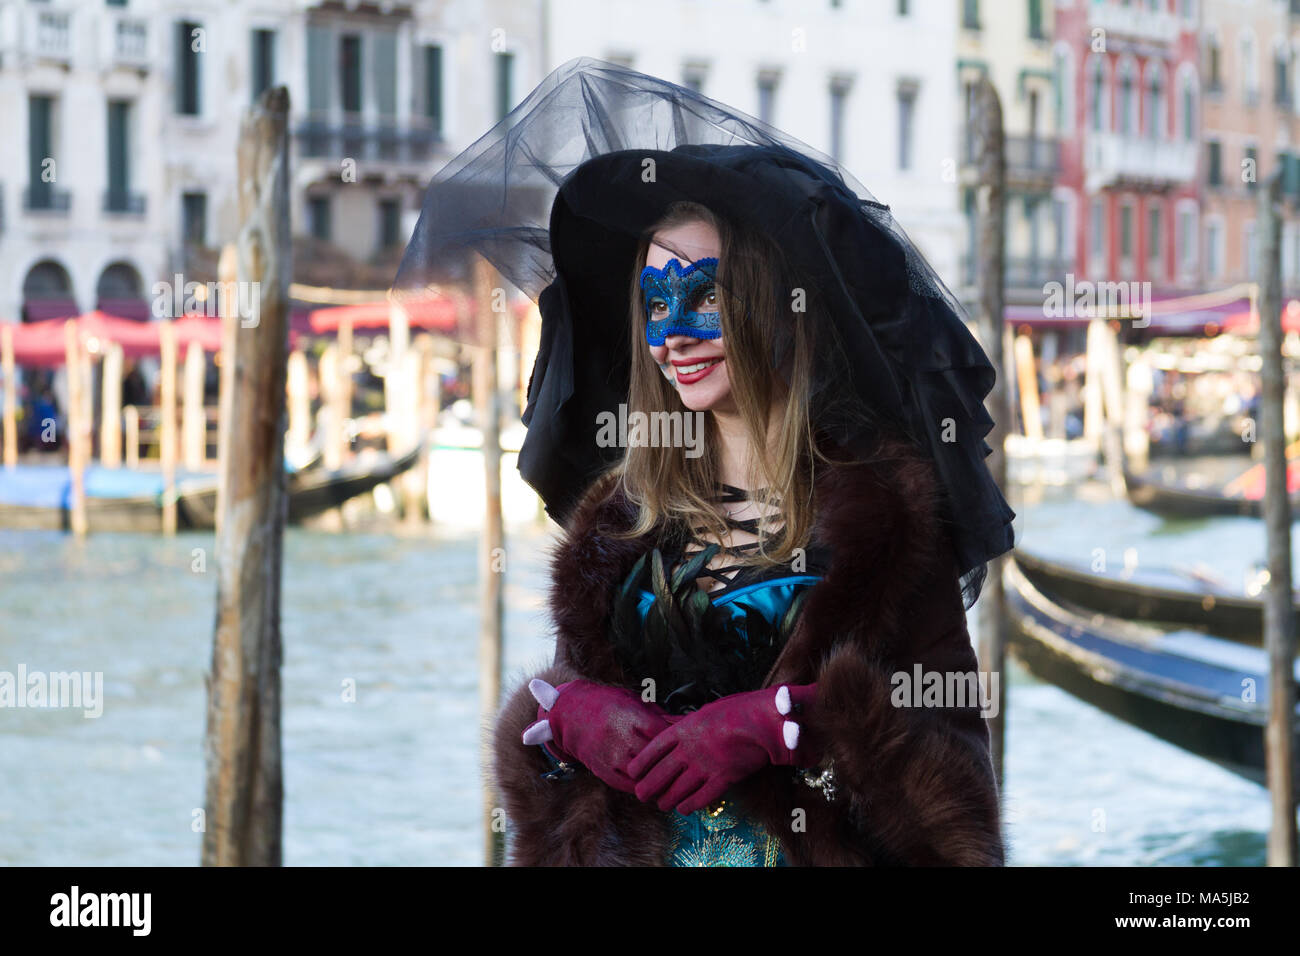 Venezia (Venice), Italy. 2 February 2018. A young woman in a costume and mask at the carnival in Venice. Stock Photo